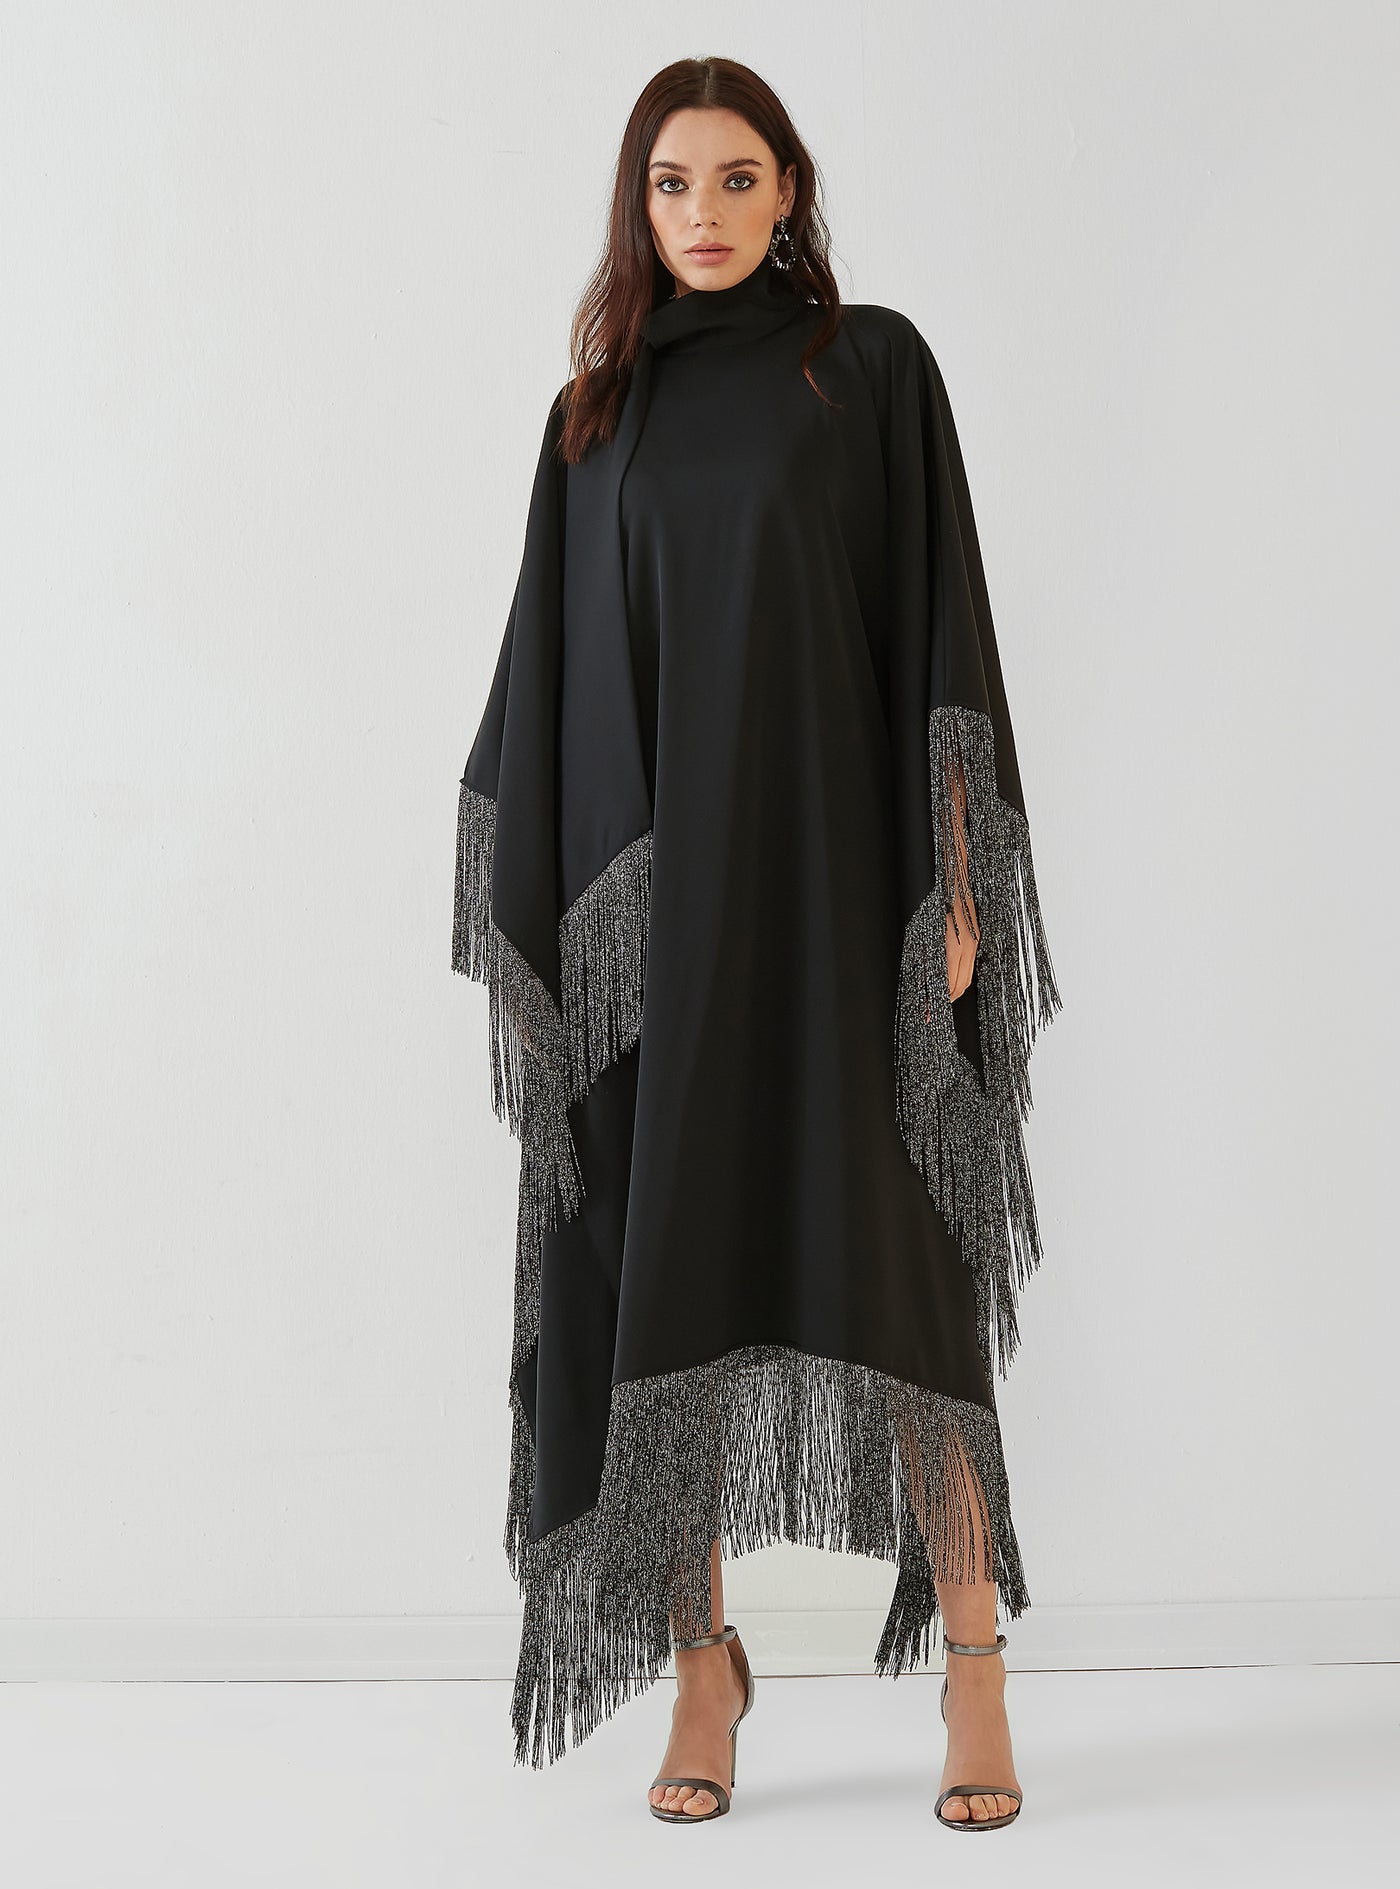 silver Fringed Kaftan dress With Tie Neck Detailed3